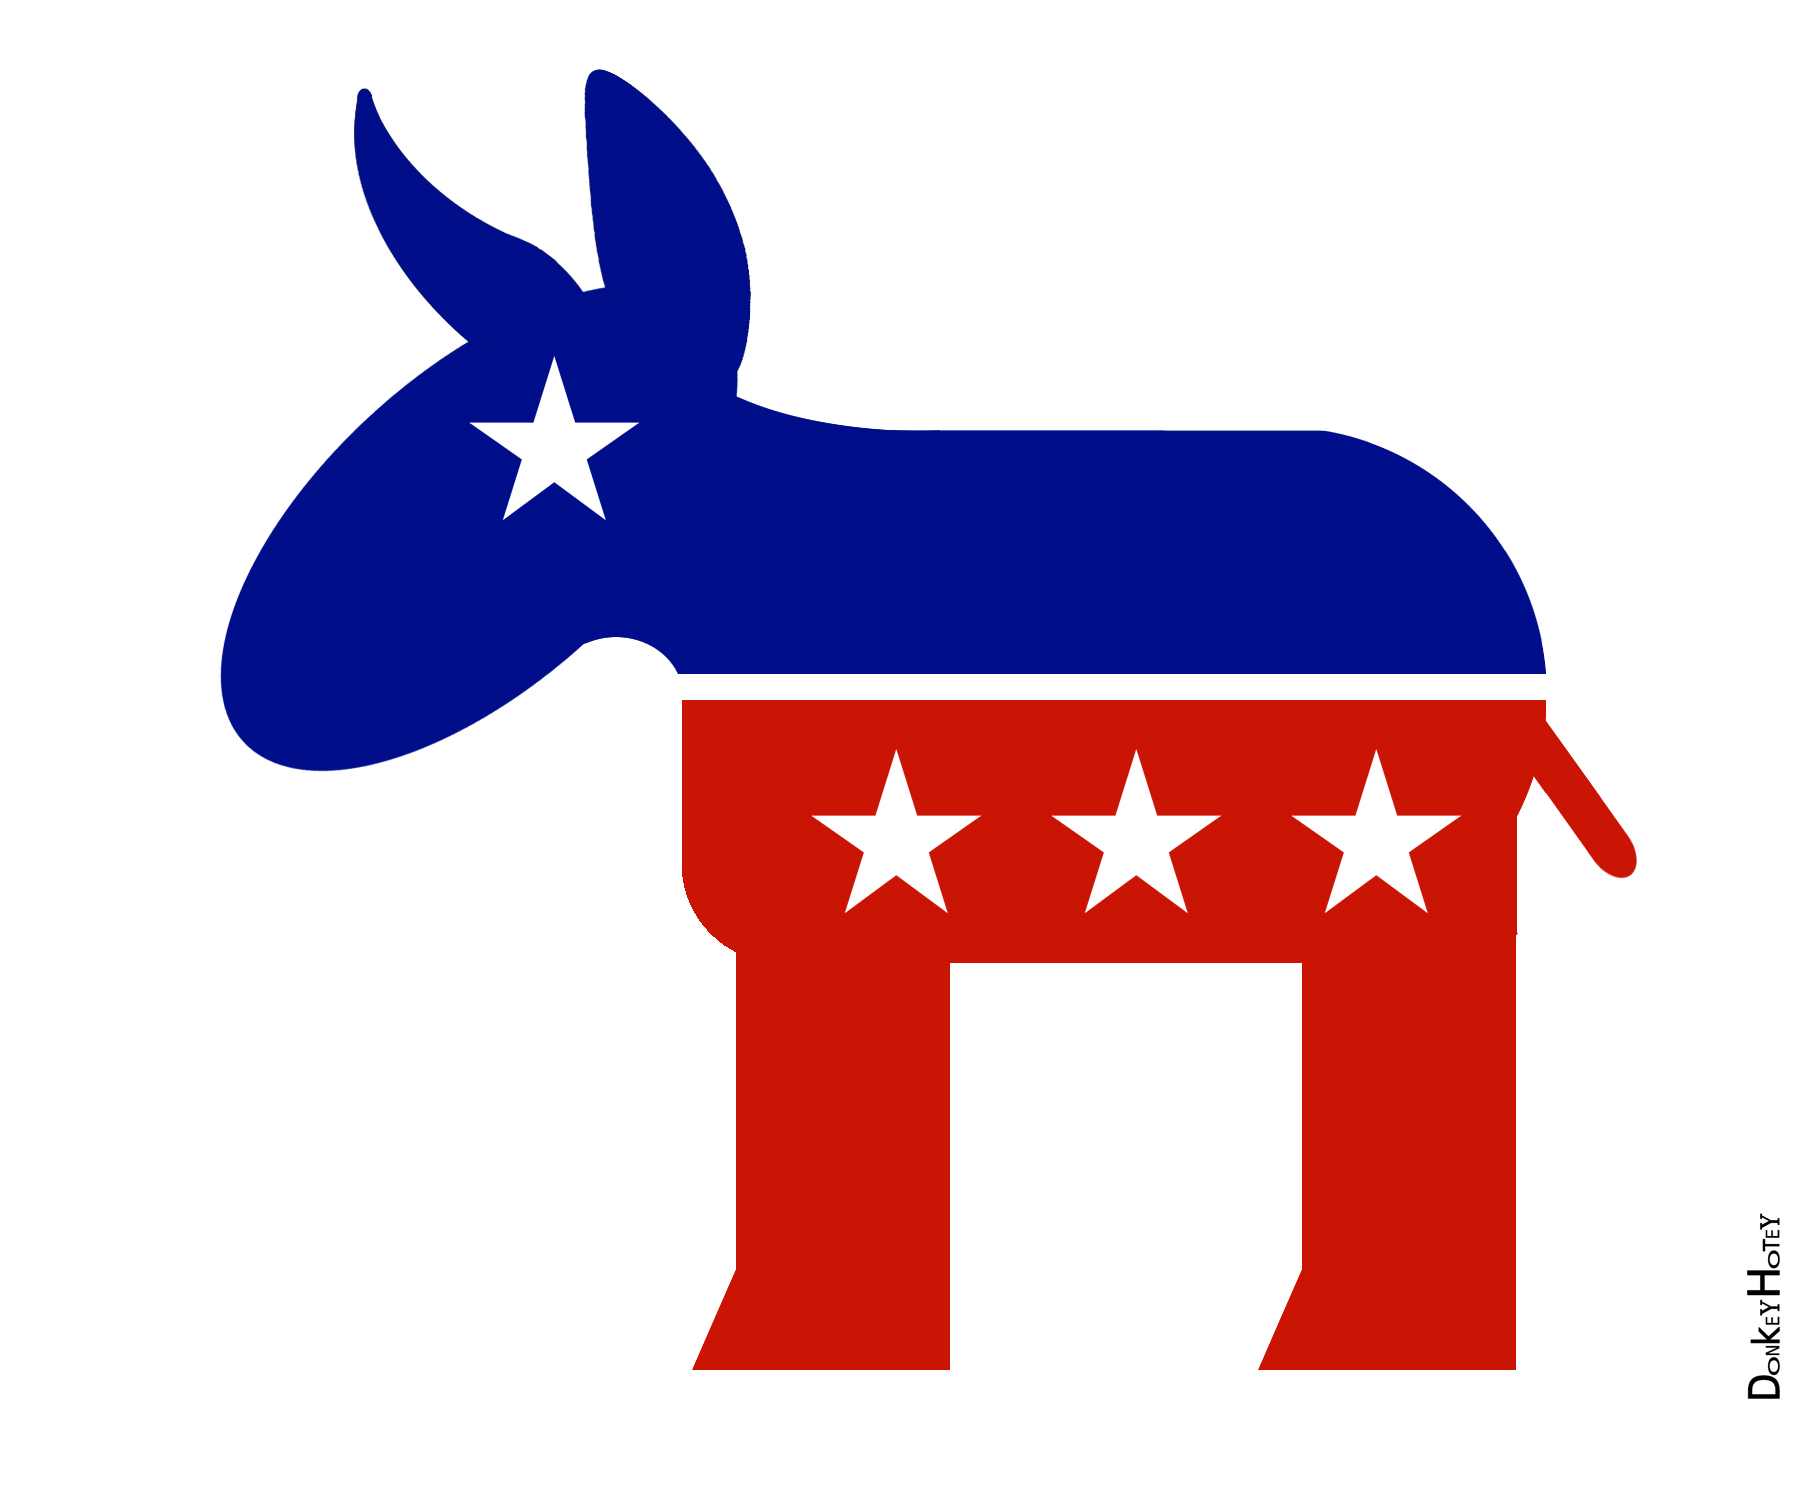 Democratic party logo with no background.